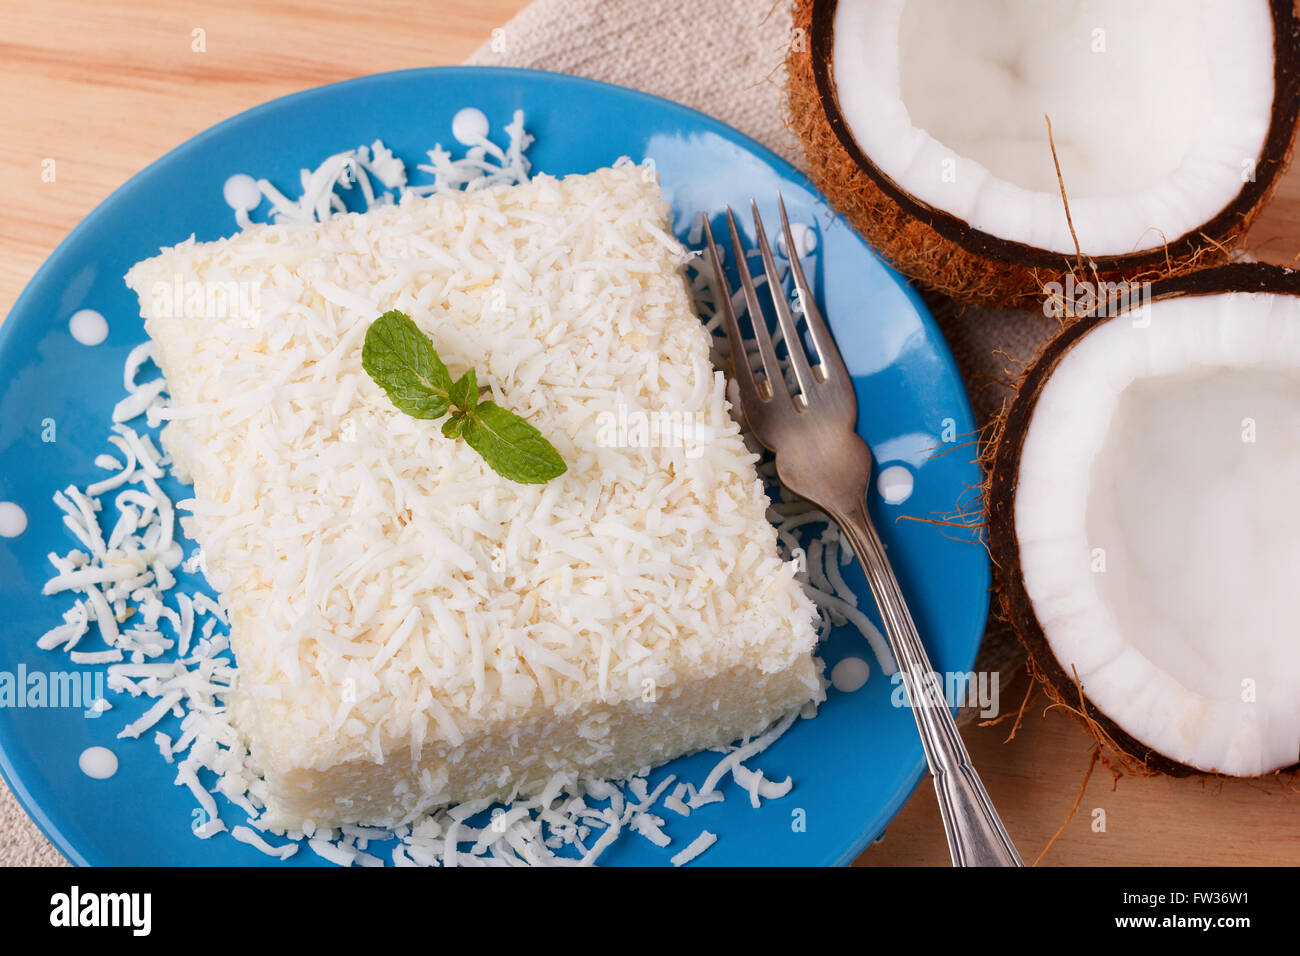 Brazilian traditional dessert: sweet couscous (tapioca) pudding (cuscuz doce) with coconut on wooden board. Selective focus Stock Photo